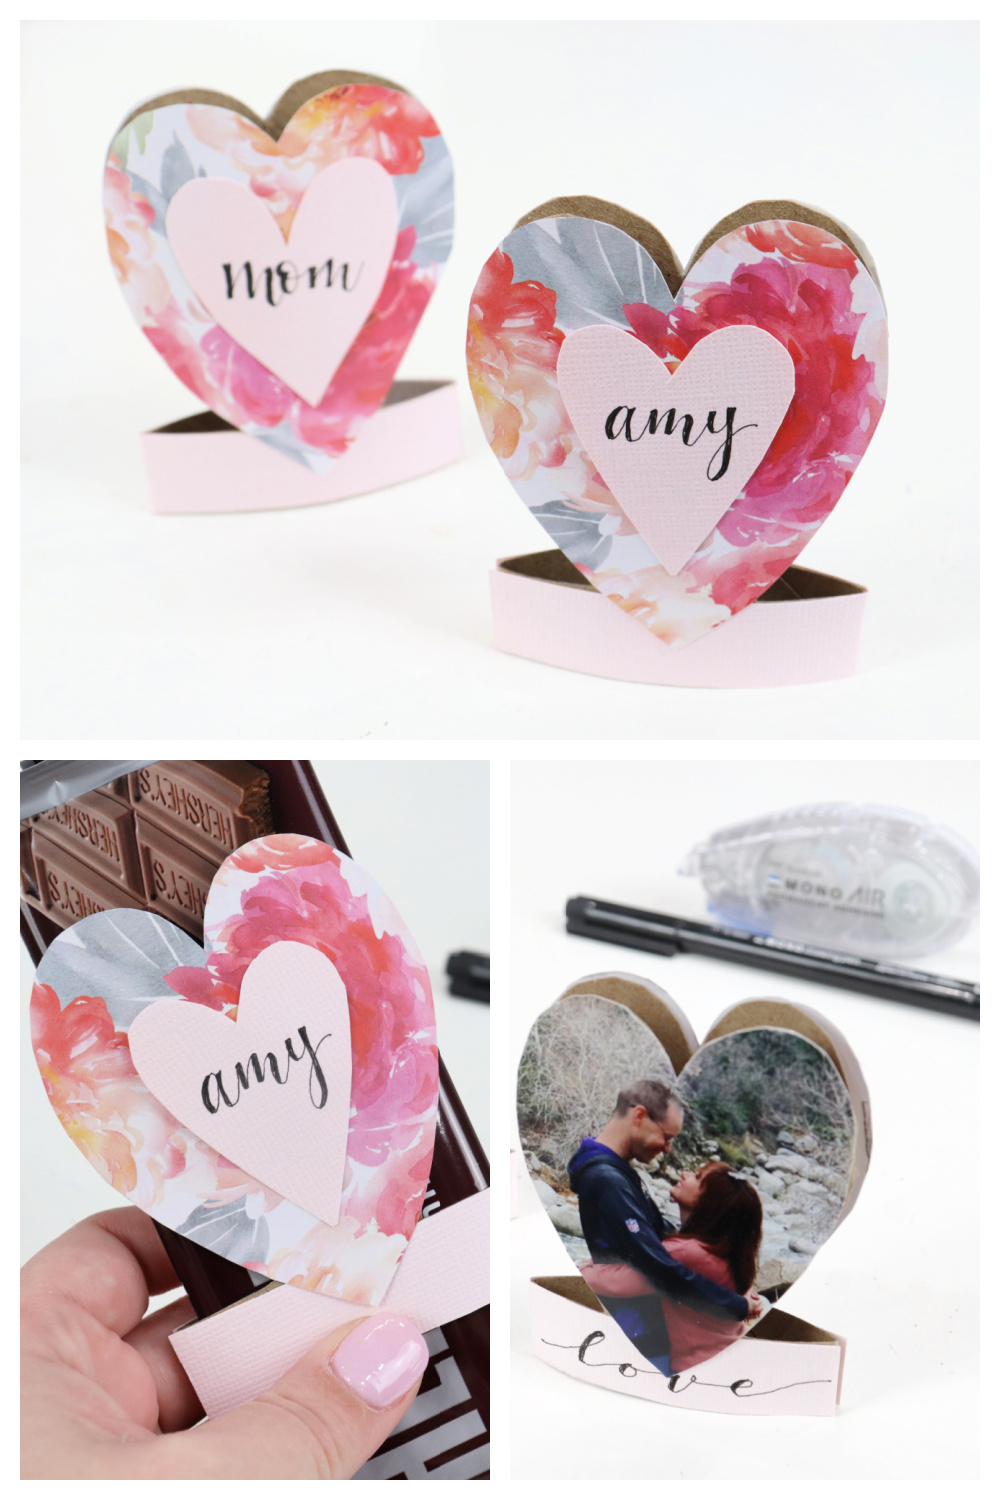 Image is a collage of finished project photos showing a toilet paper roll turned into a heart shaped candy bar sleeve.